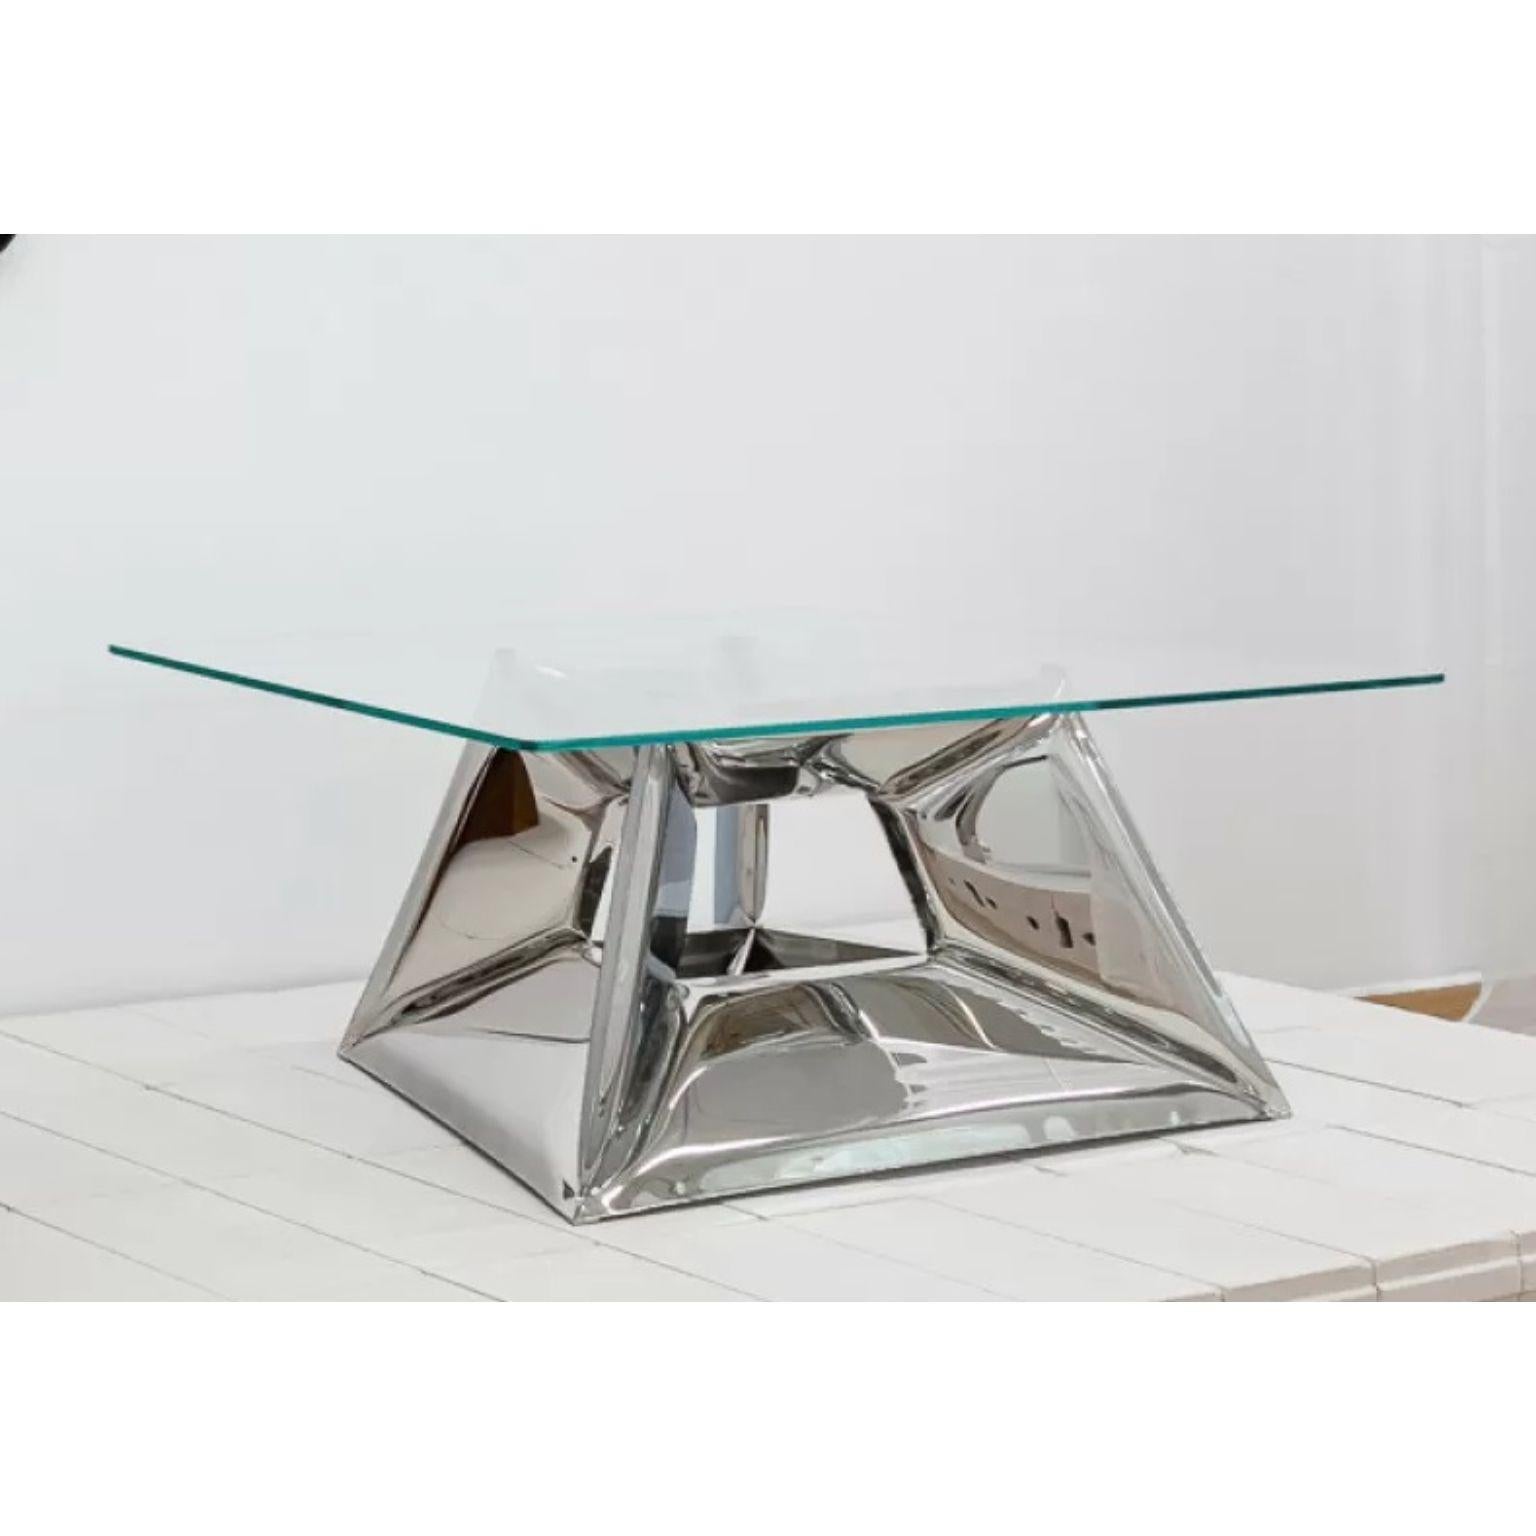 Crystals Coffee Table by Zieta
Dimensions: D 80 x W 130 x H 45 cm.
Materials: Glass and polished stainless steel.

Inspired by diamonds
The steel base of the CRYSTALS coffee table curves the surroundings in its mirrored surfaces like a kaleidoscope.